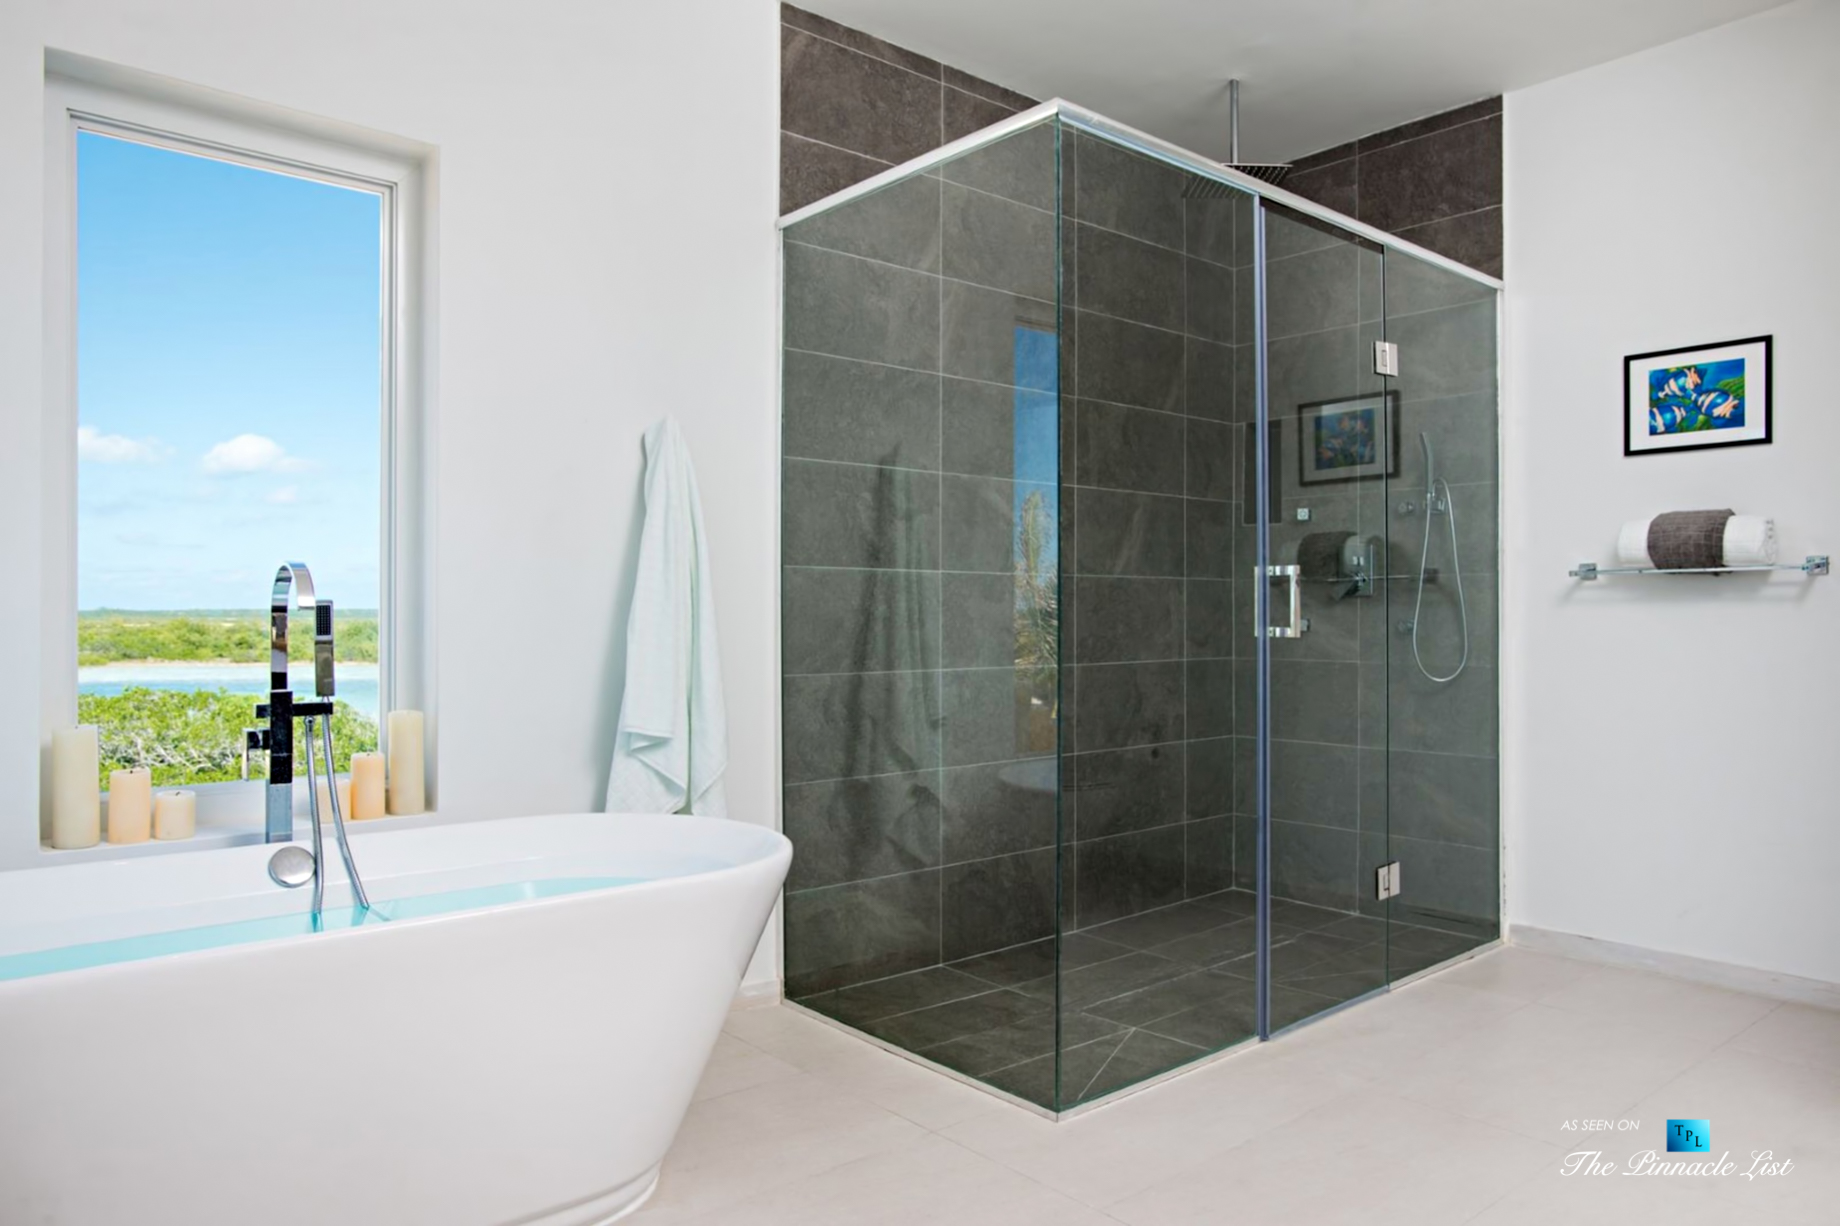 Tip of the Tail Villa – Providenciales, Turks and Caicos Islands – Caribbean House Bathroom and Shower – Luxury Real Estate – South Shore Peninsula Home